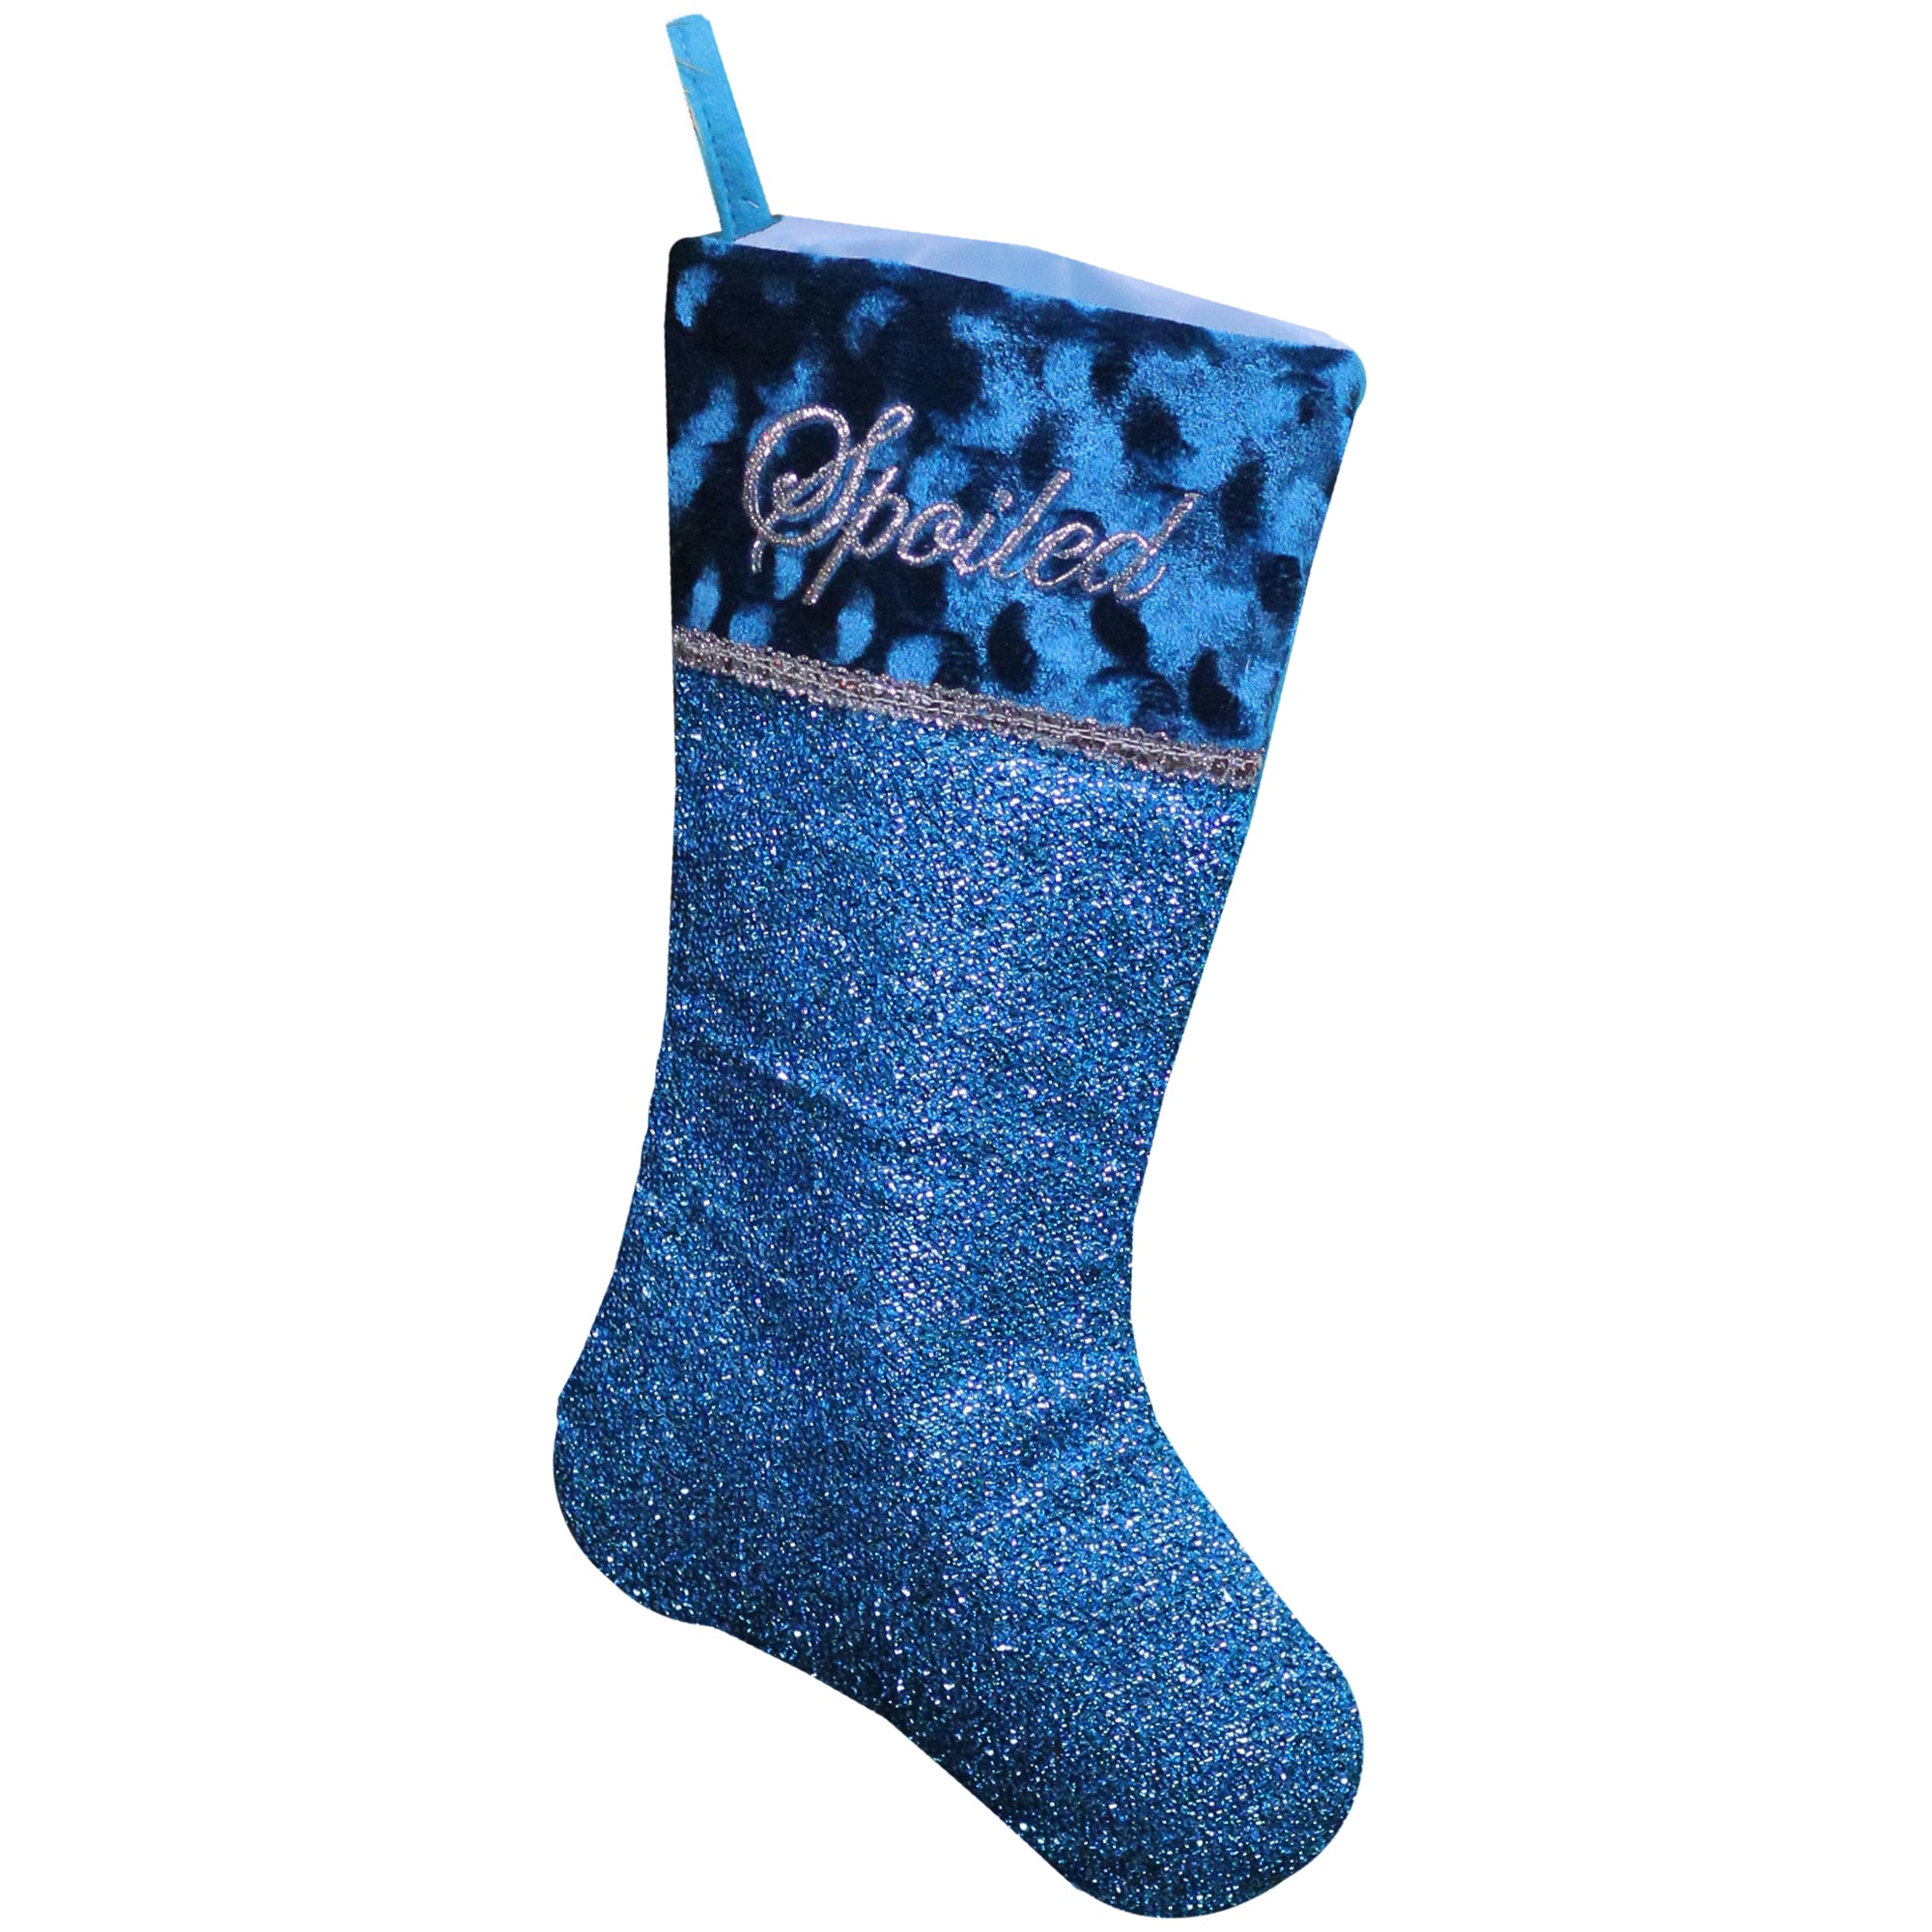 17" Metallic Blue Embroidered  "Spoiled" Christmas Stocking with Shadow Velveteen Cuff